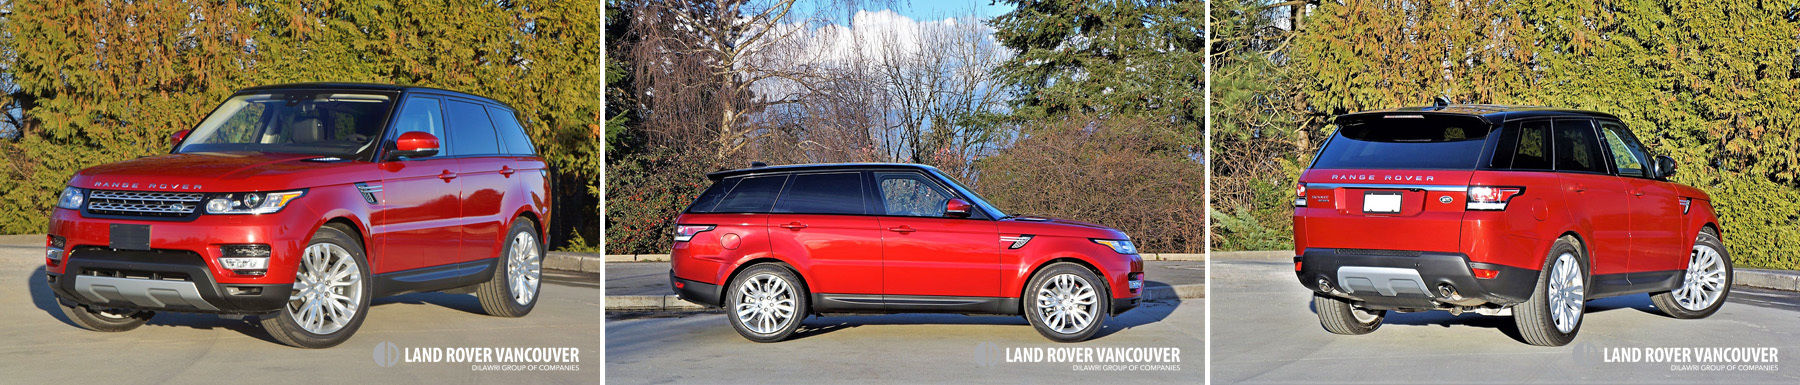 Land Rover Forecasted Top Luxury Brand in ALG Residual Value Awards